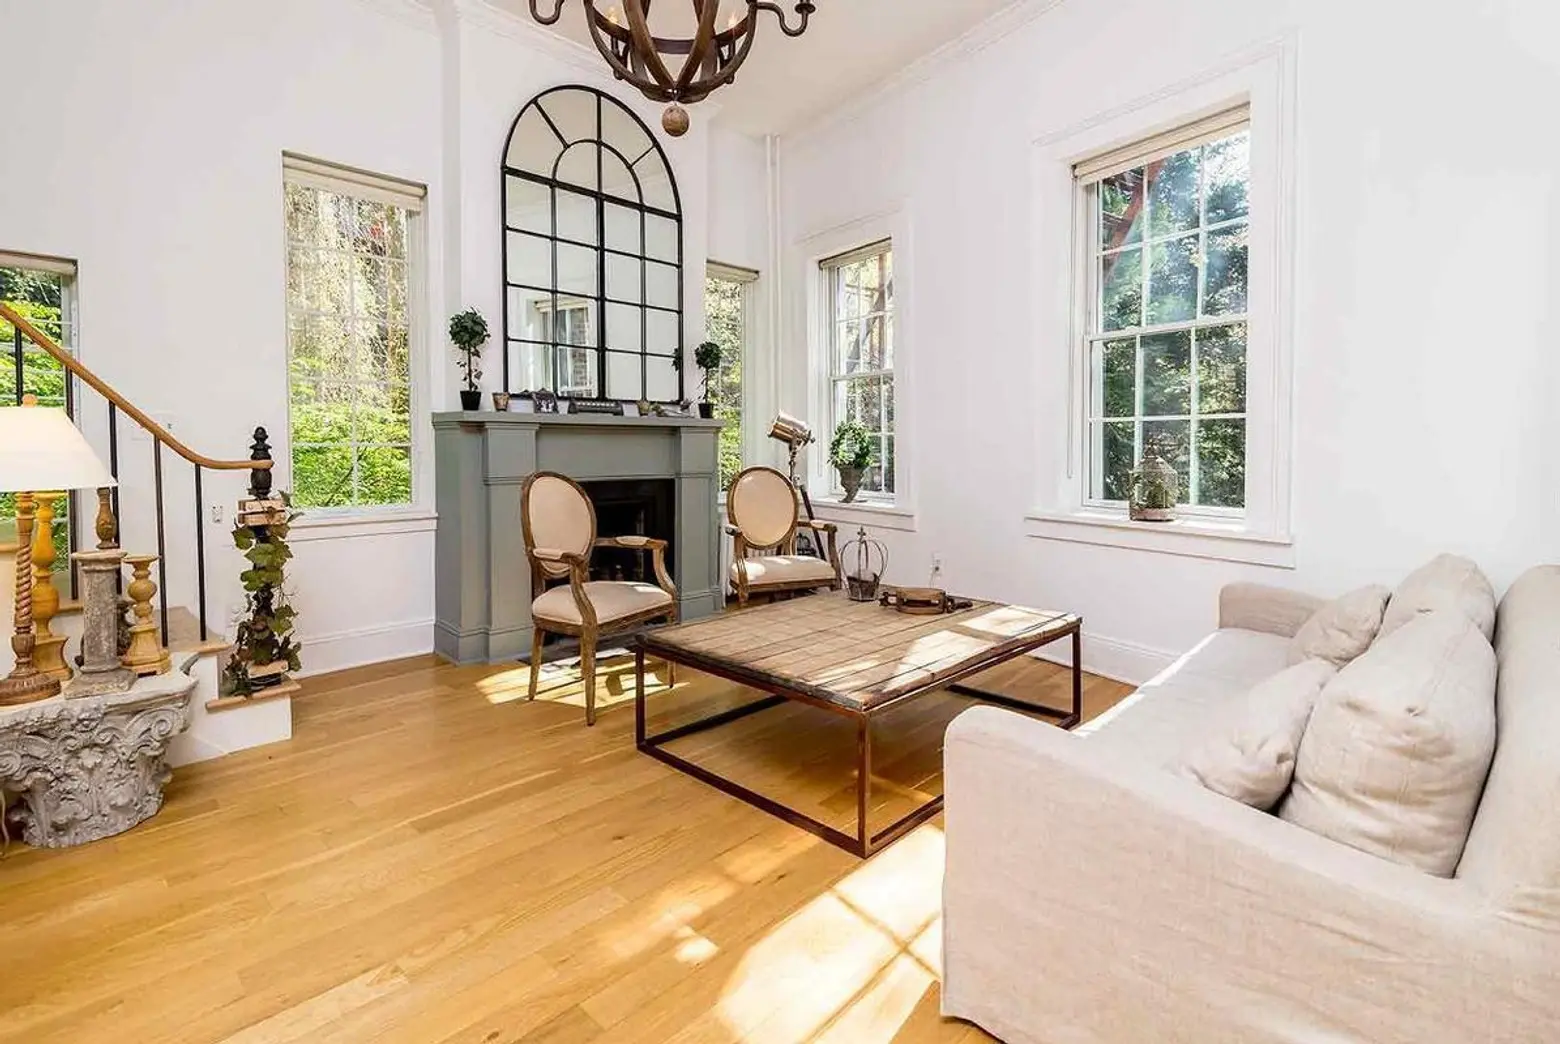 Recently renovated three-bedroom pad in an 1844 West Village townhouse asks $2.7M